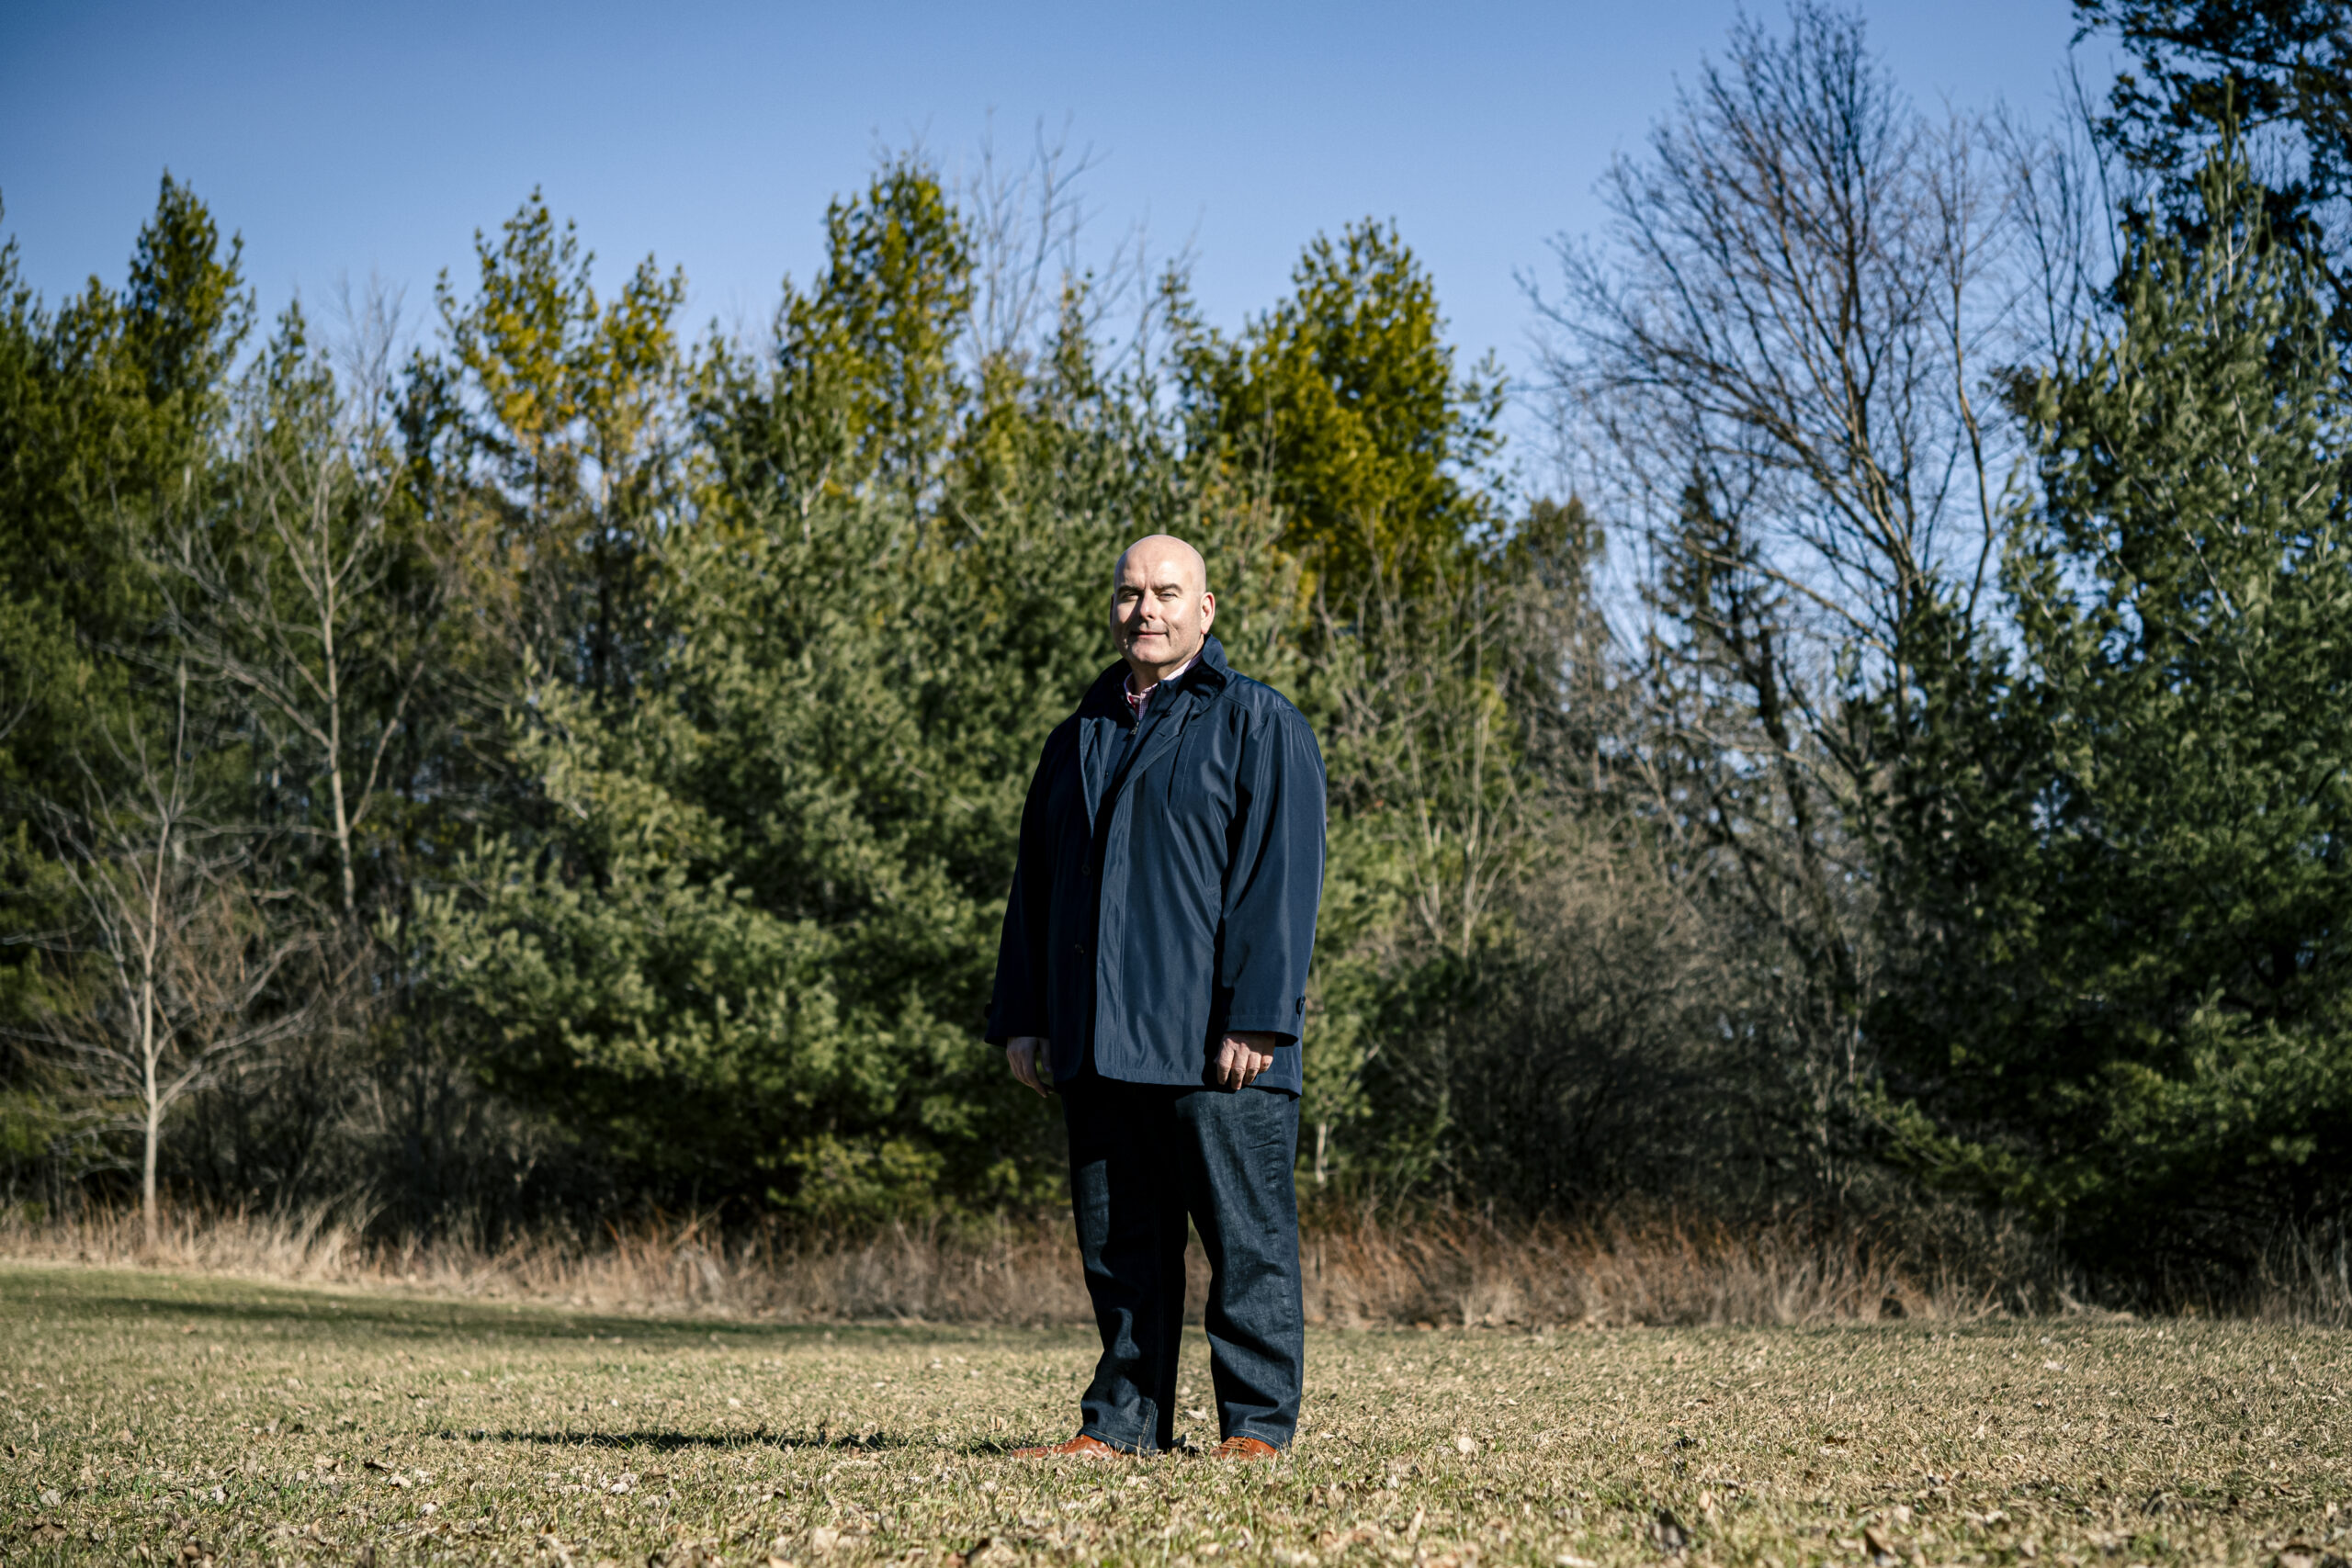 Ontario Liberal leader Steven Del Duca stands in a field in a the sun in front of trees and a clear sky. His environment plan for the 2022 Ontario election hasn't been released yet.